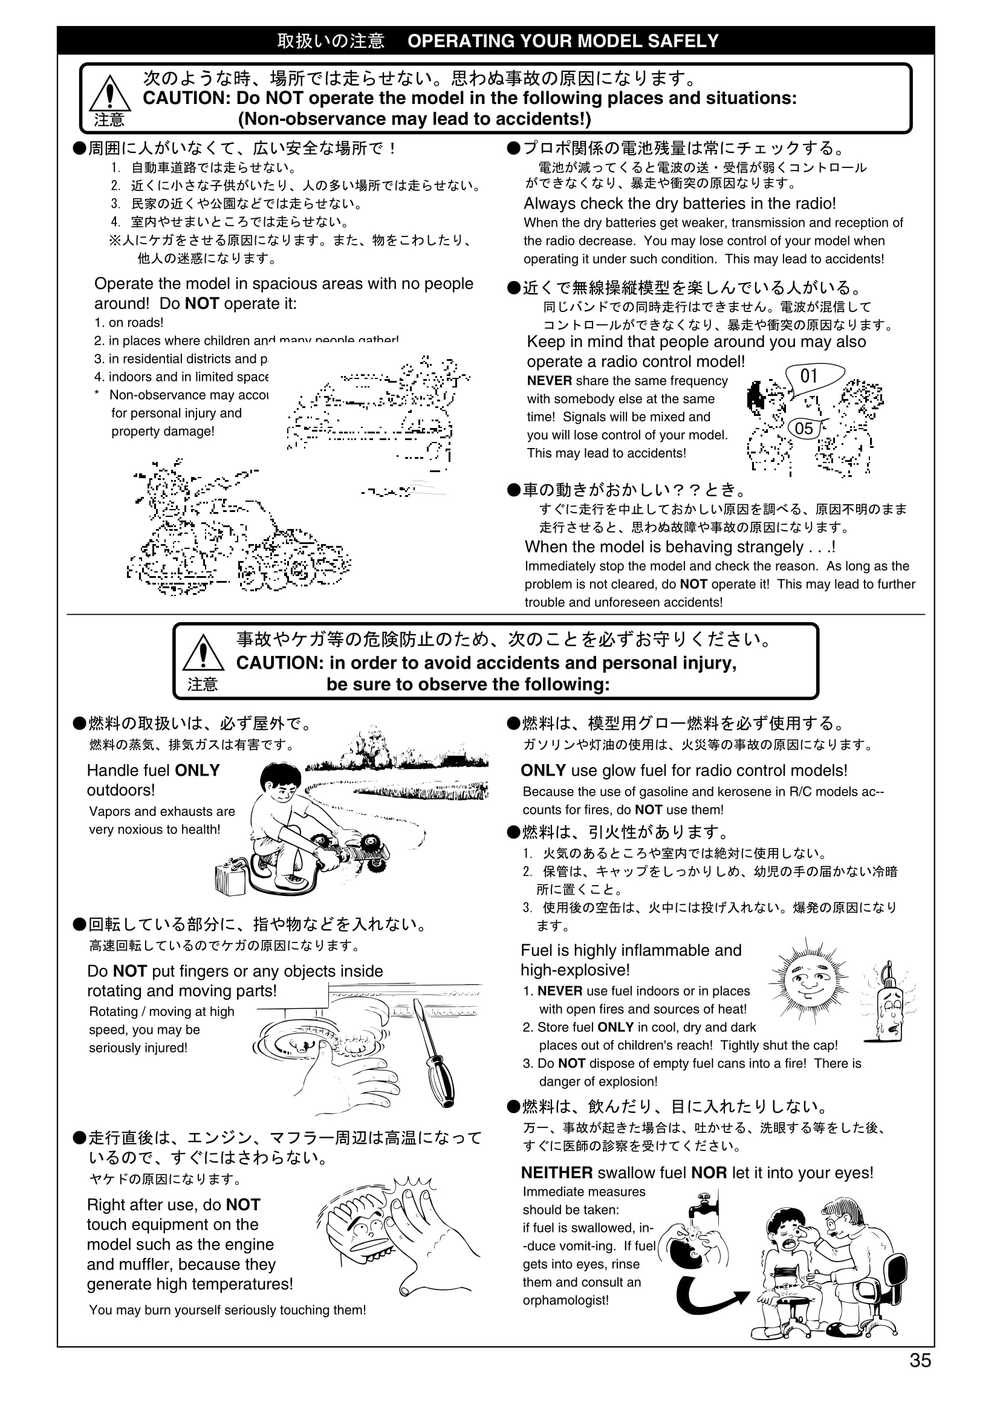 Kyosho - 31221 - Mad-Force - Manual - Page 35